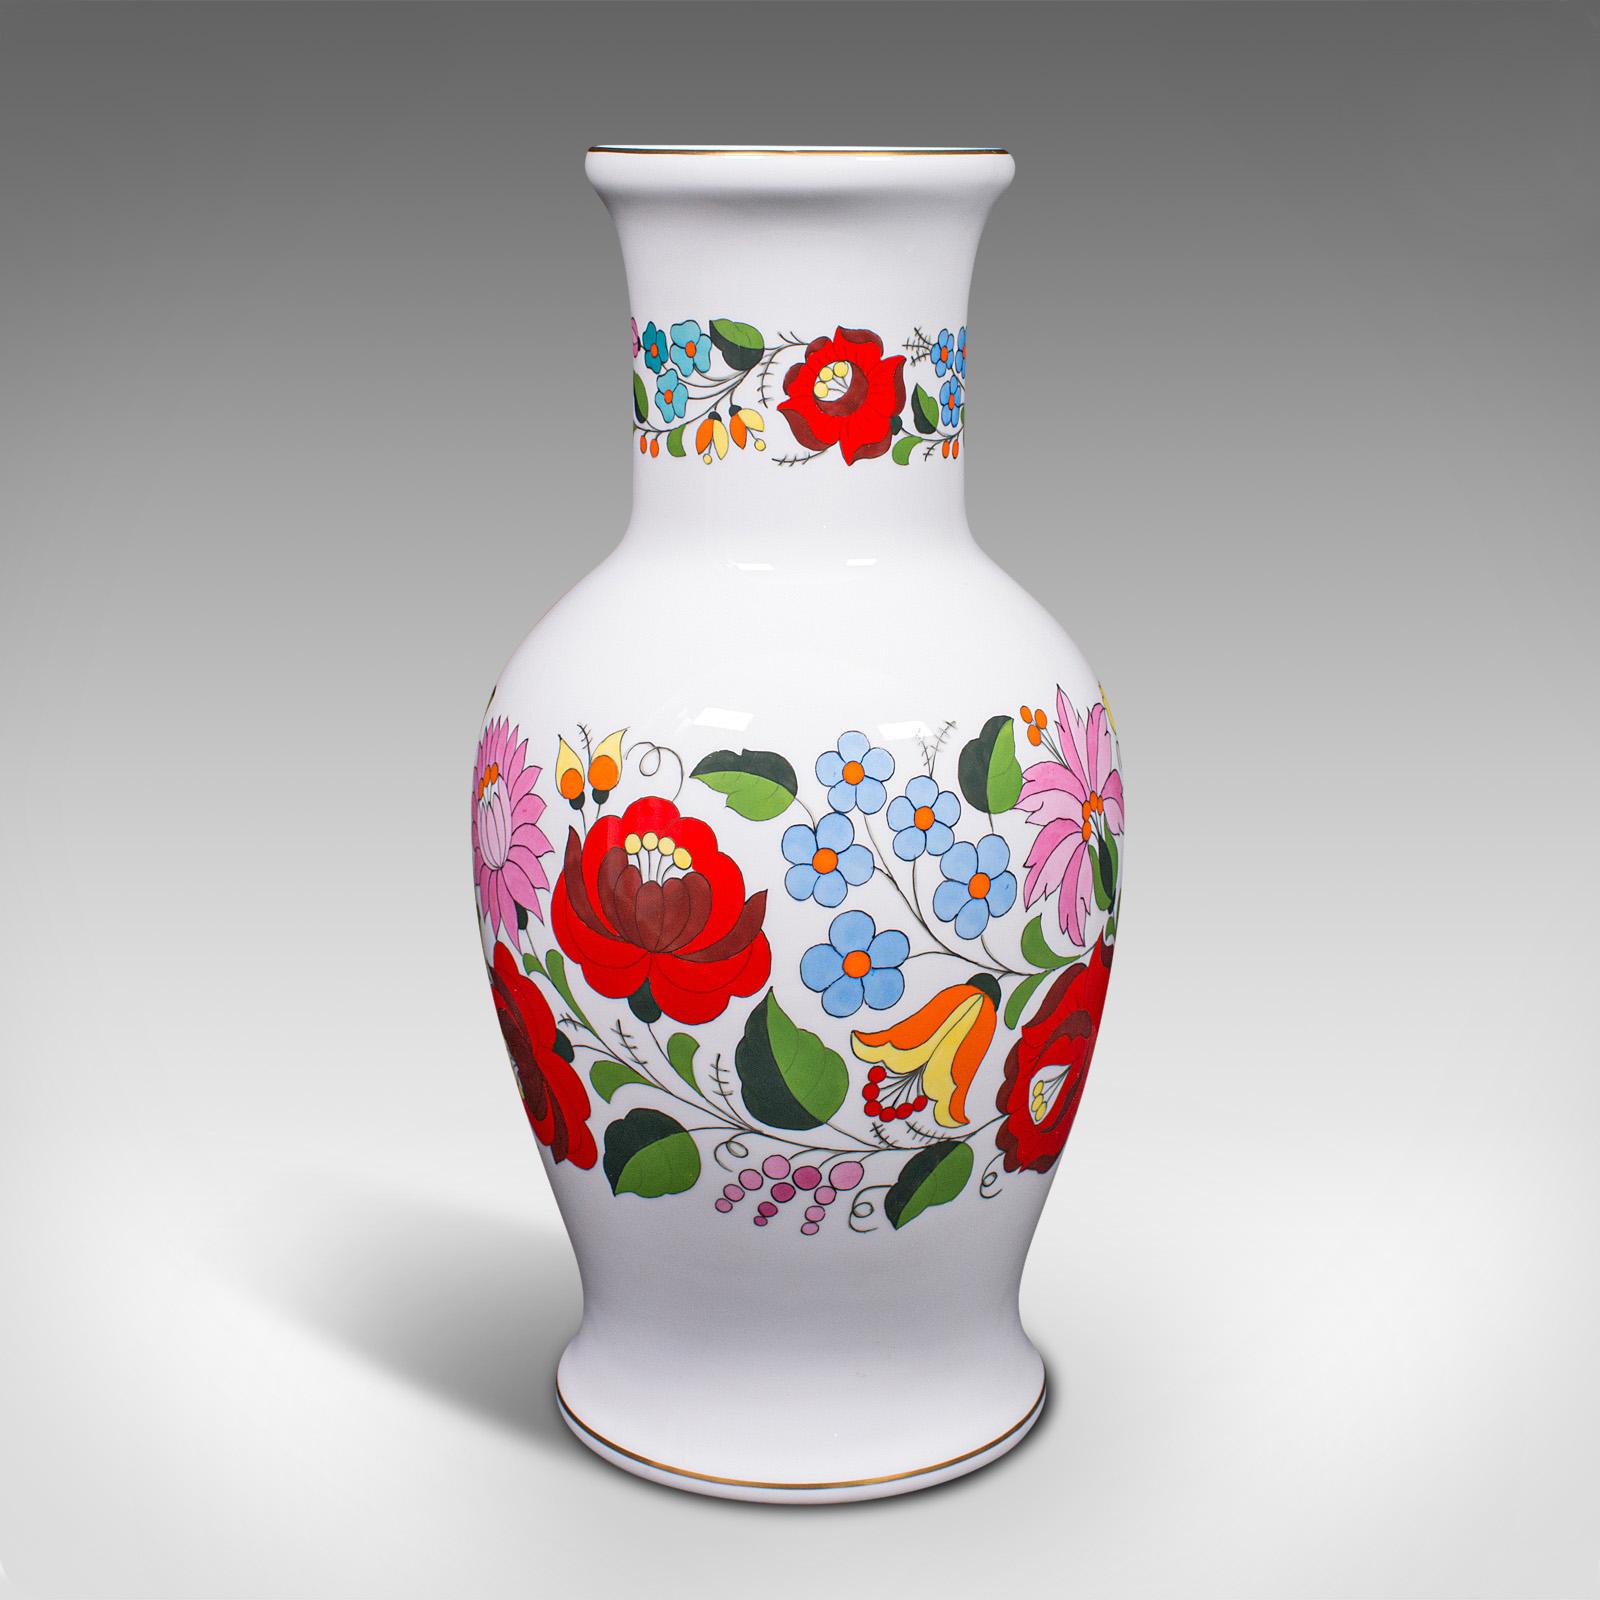 Large Vintage Flower Vase, Hungarian, Ceramic, Baluster, Decorative, Late 20th In Good Condition For Sale In Hele, Devon, GB